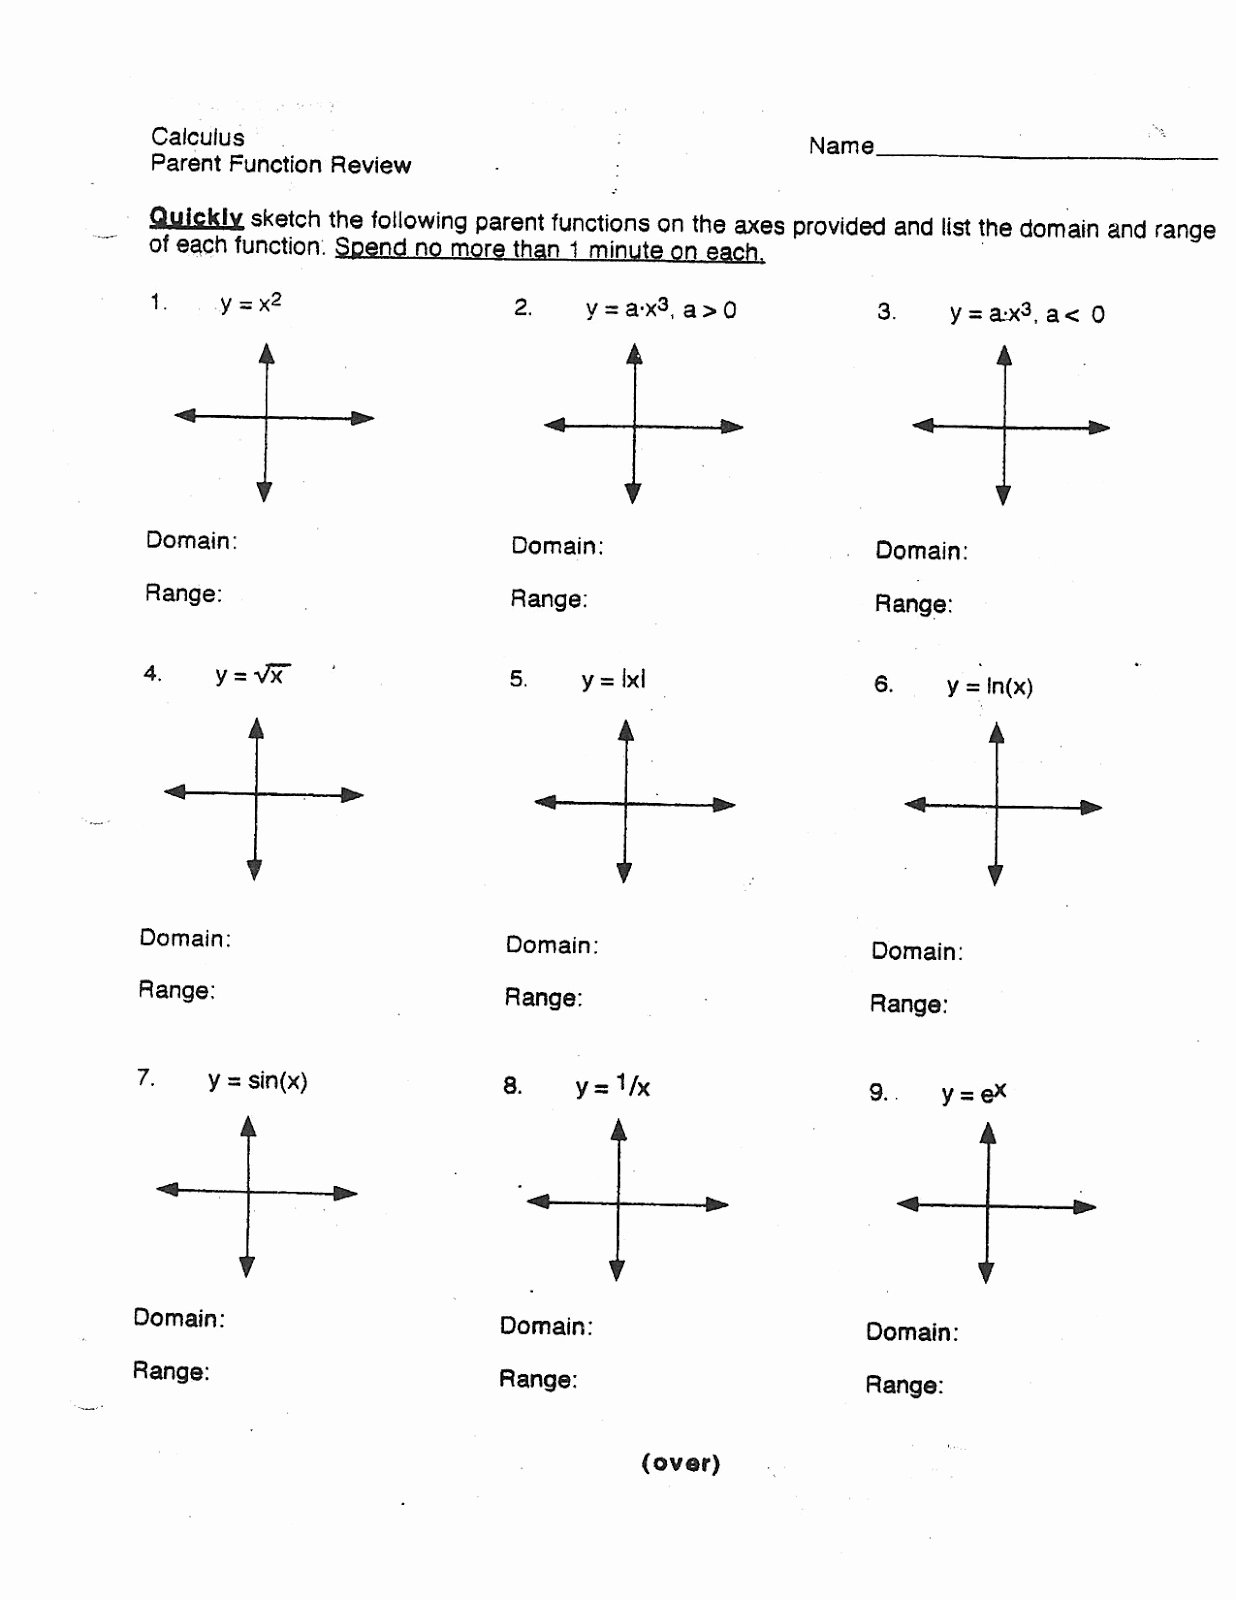 Unit Circle Worksheet with Answers Fresh Mr Suominen S Math Homepage August 2013